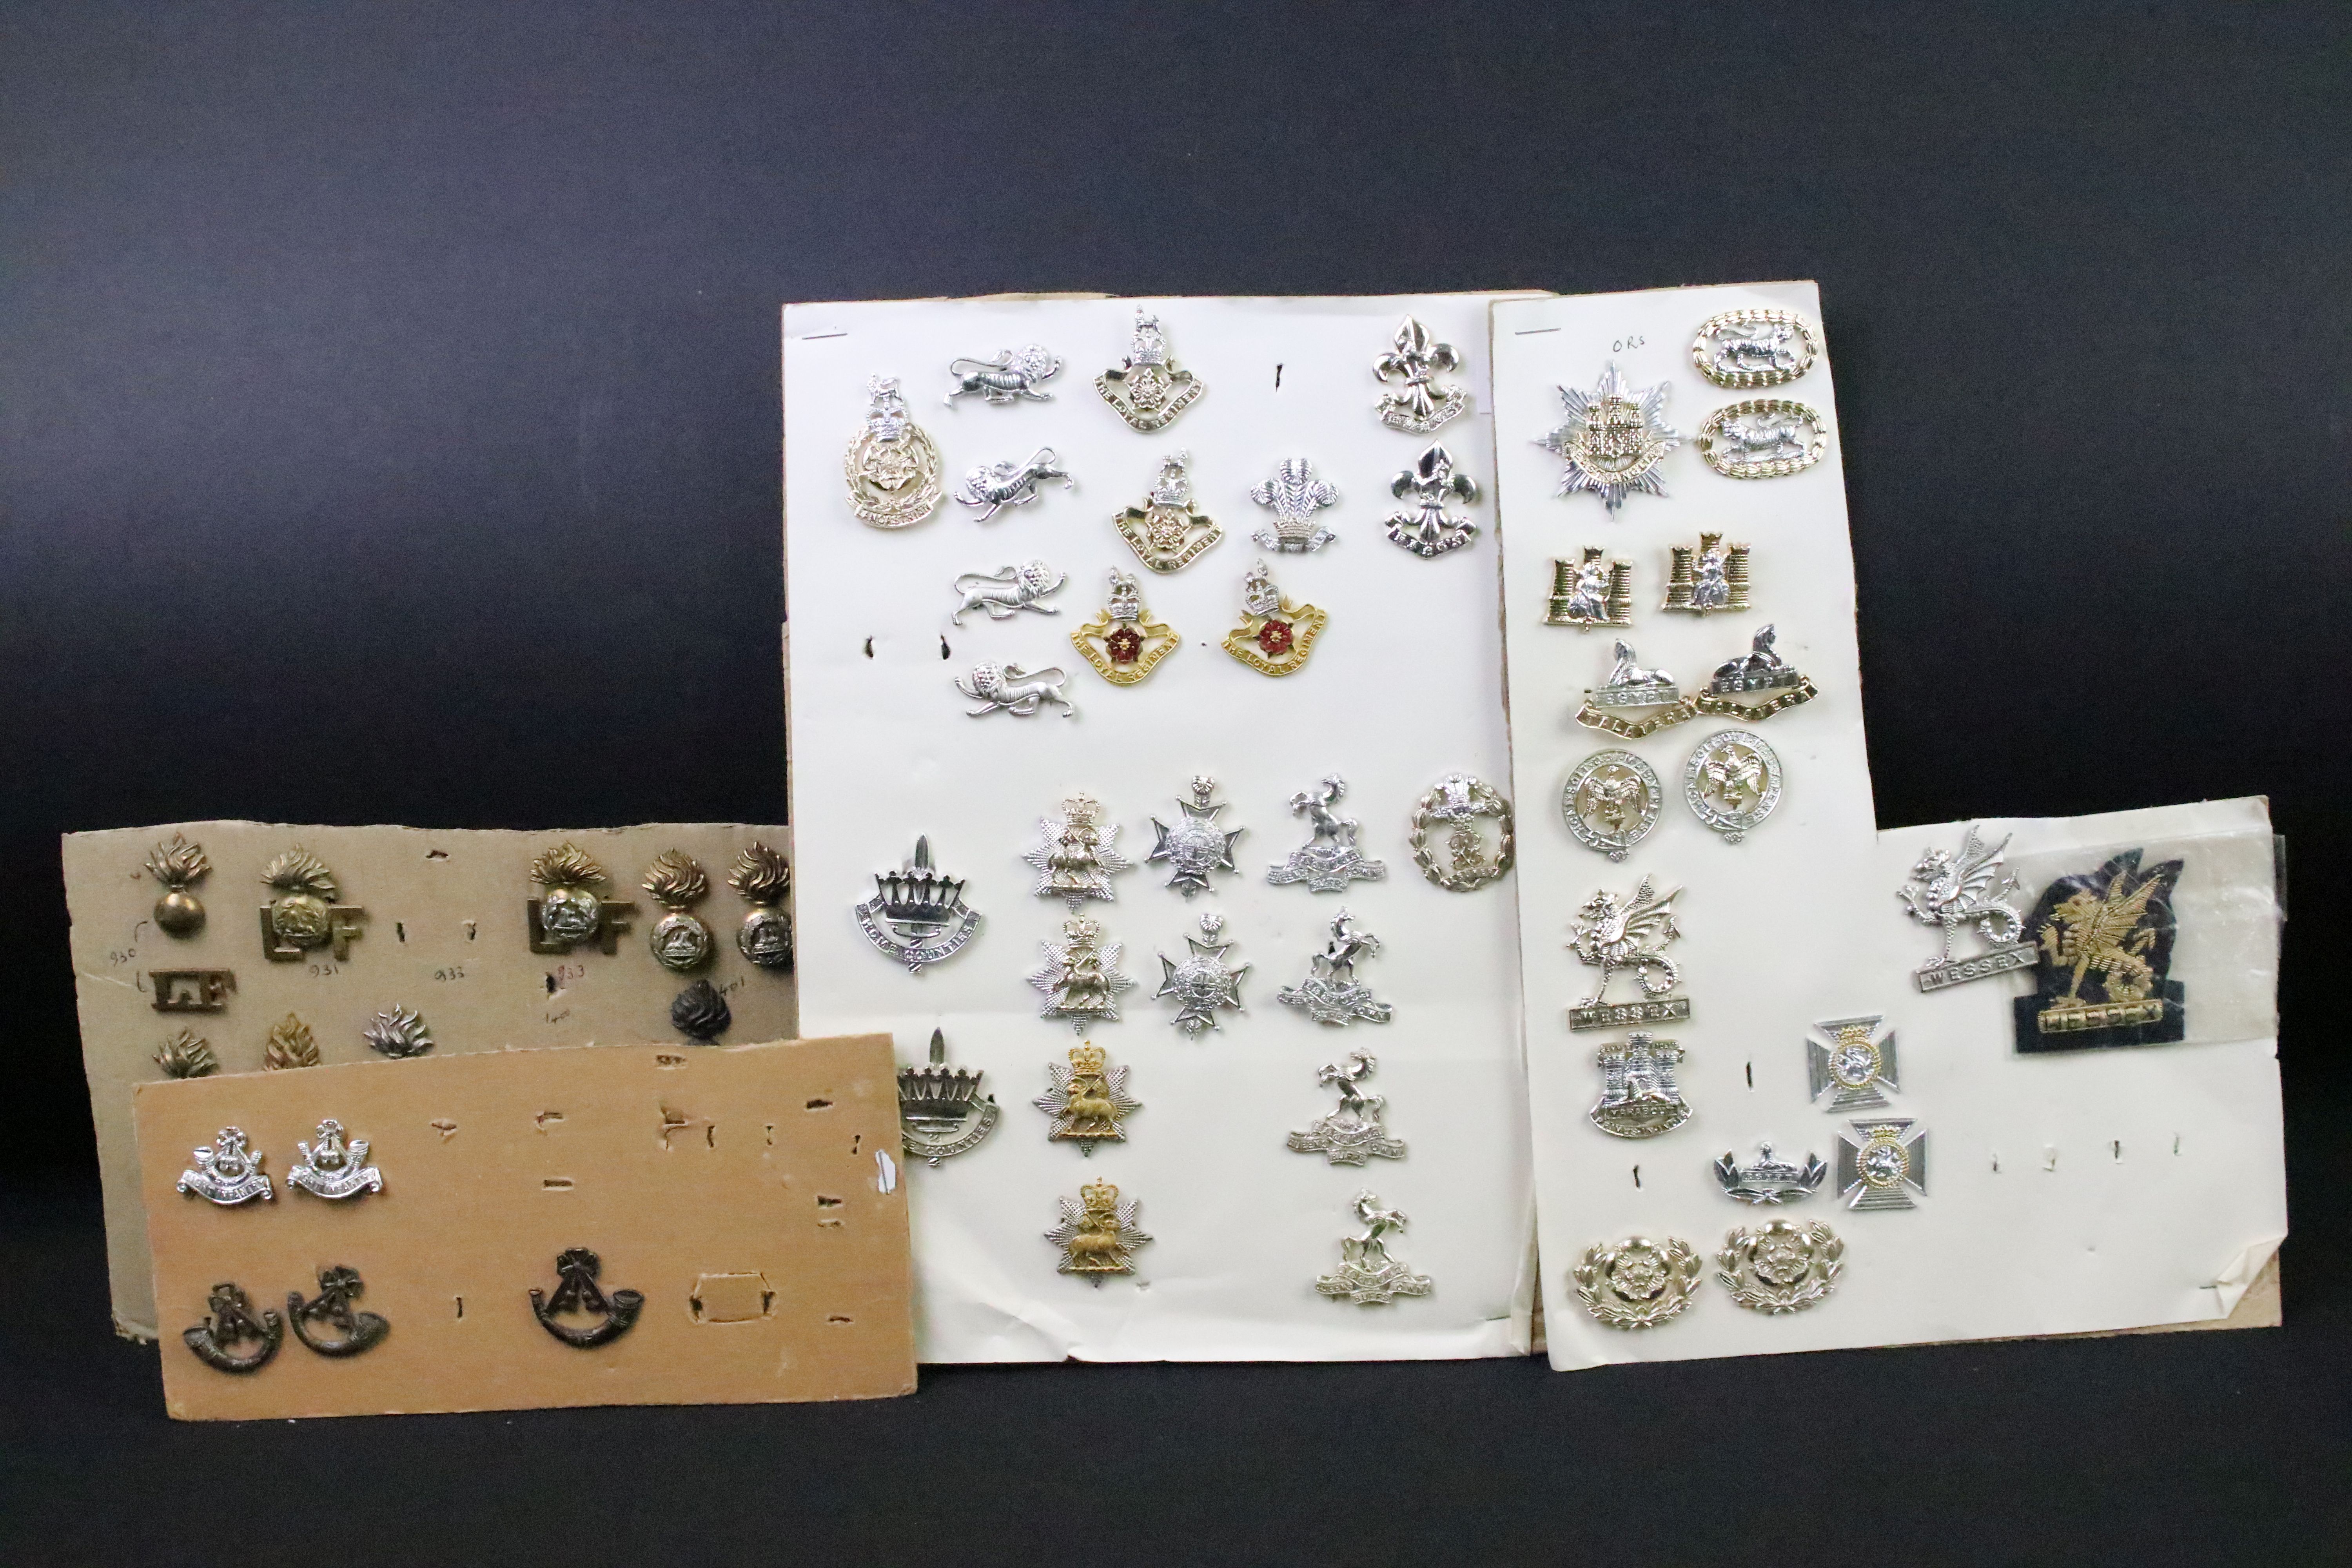 A collection of British military regimental cap and collar badges to include the Somerset Light